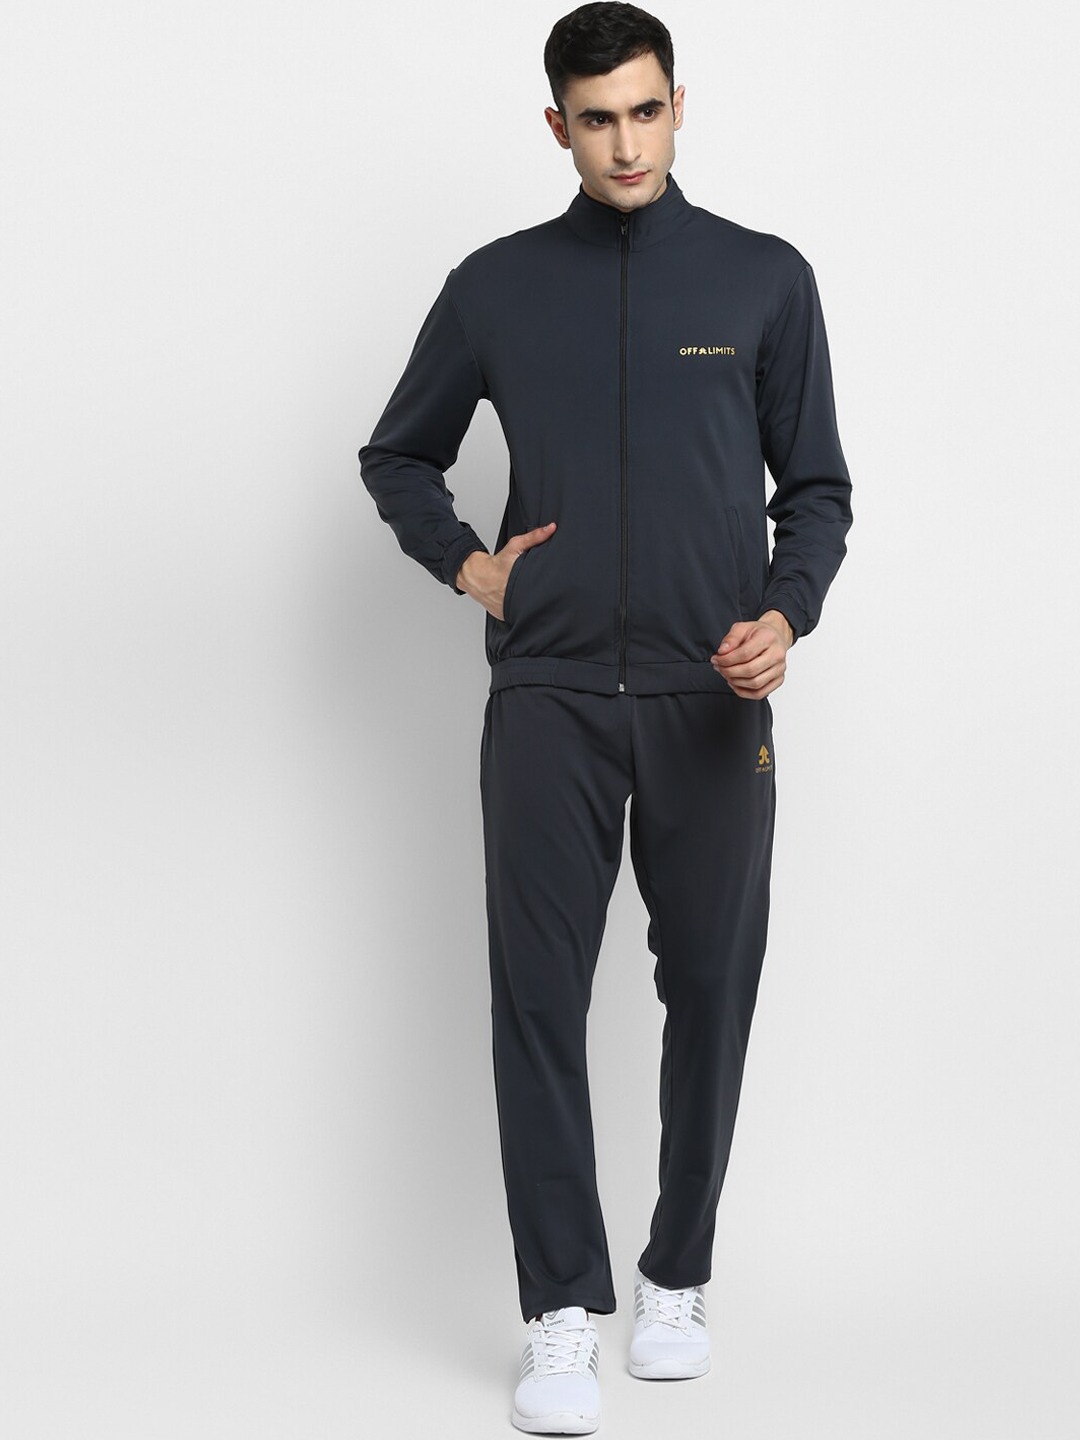 Clothing Tracksuits | OFF LIMITS Men Charcoal-Grey Solid Track Suit - MA43287